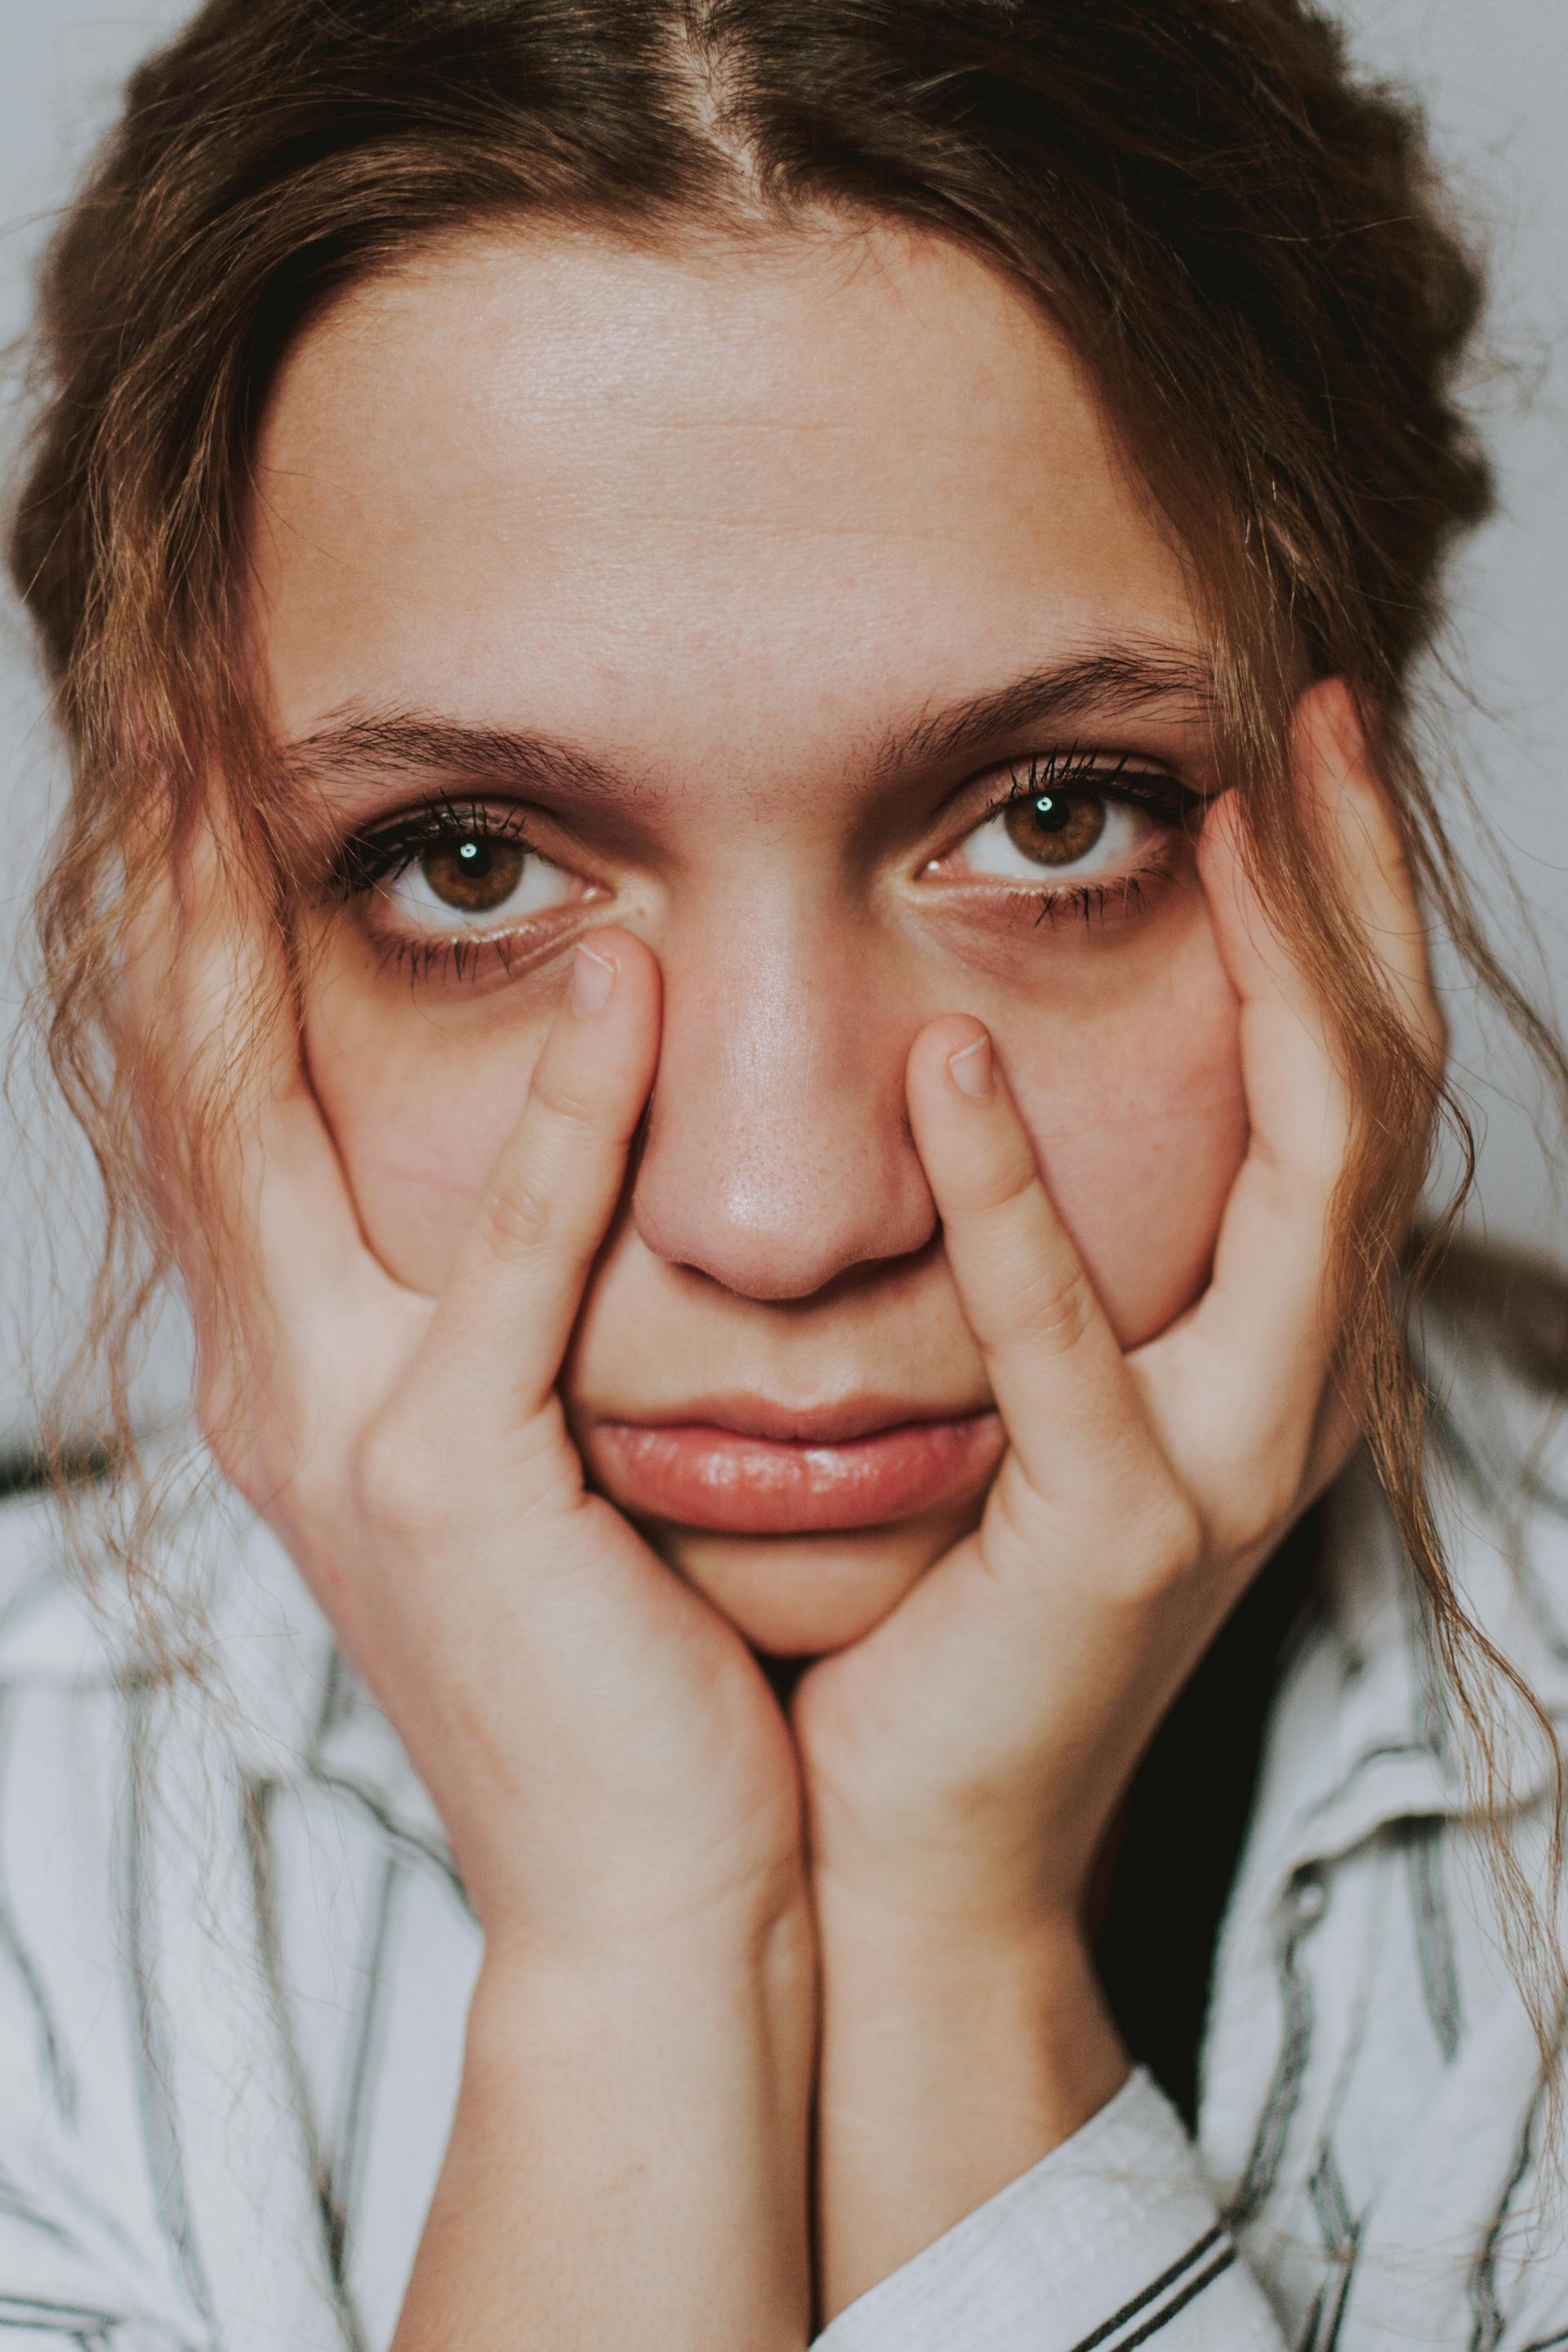 A stressed out woman | Source: Pexels